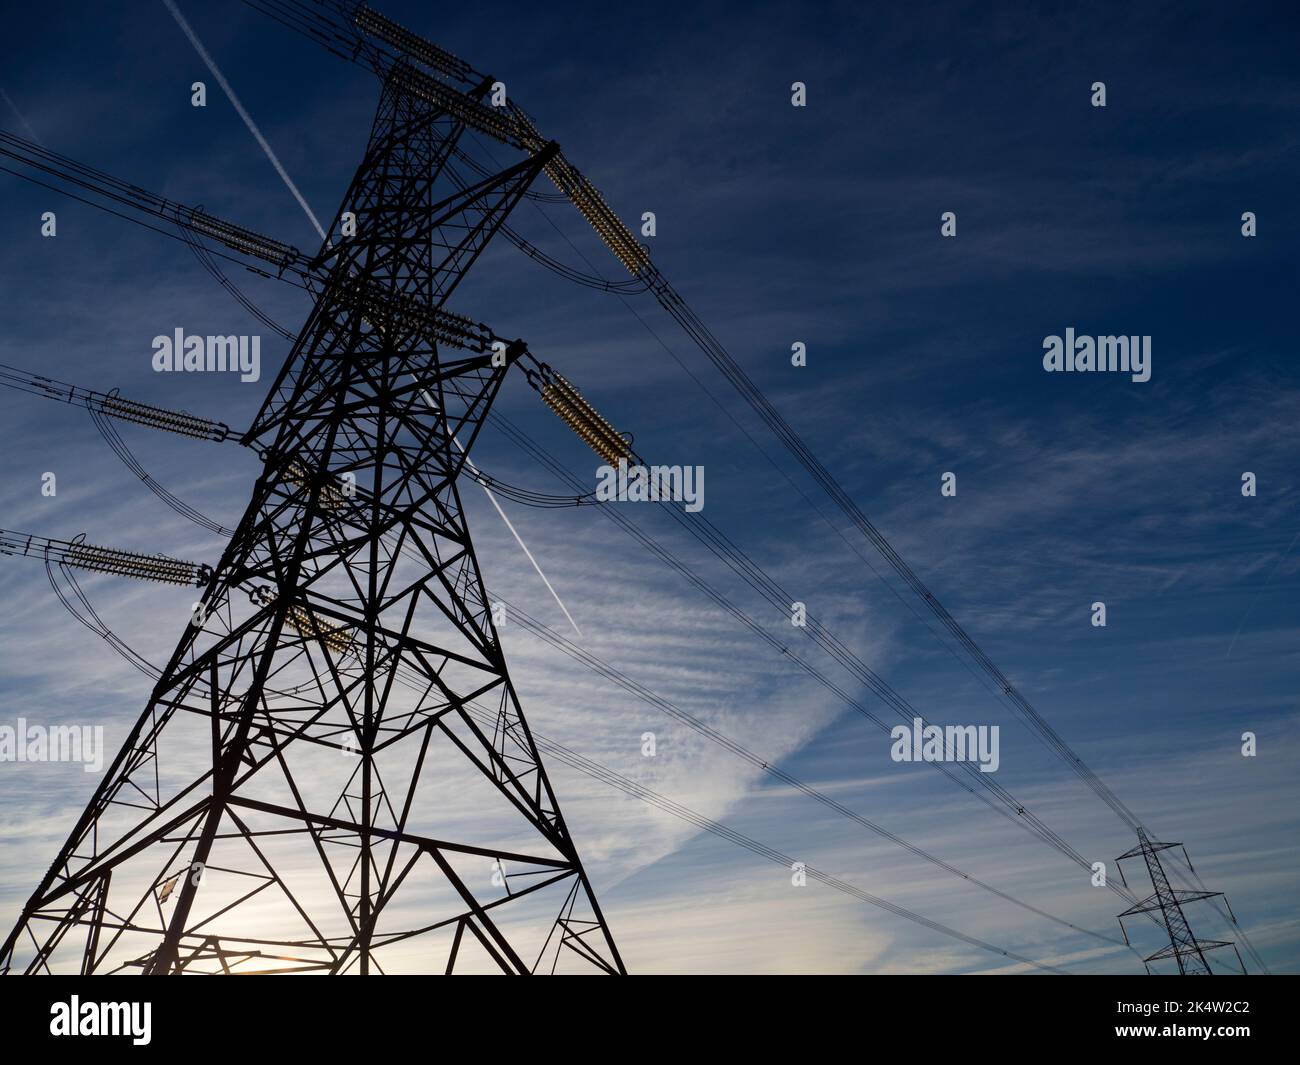 I love electricity pylons; I find their abstract, gaunt shapes endlessly fascinating. Here we see two giant pylons in a field by the Thames at Kenning Stock Photo